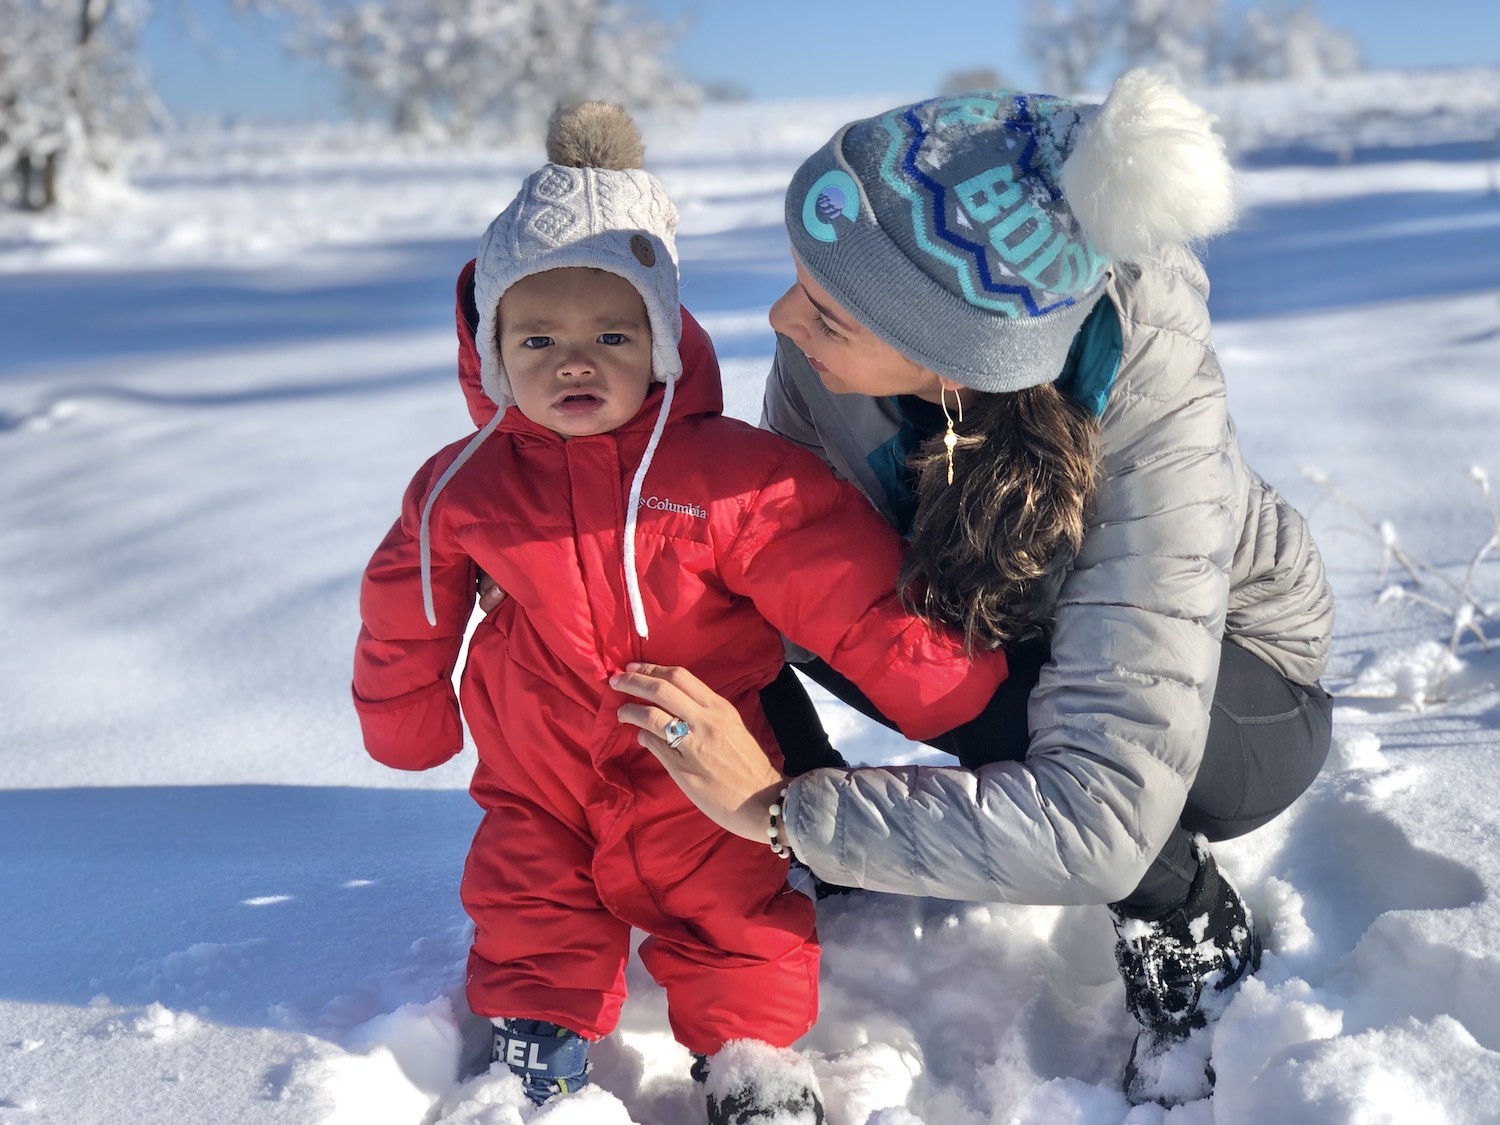 Dr. Rios-Berrios with her child in a field of snow.